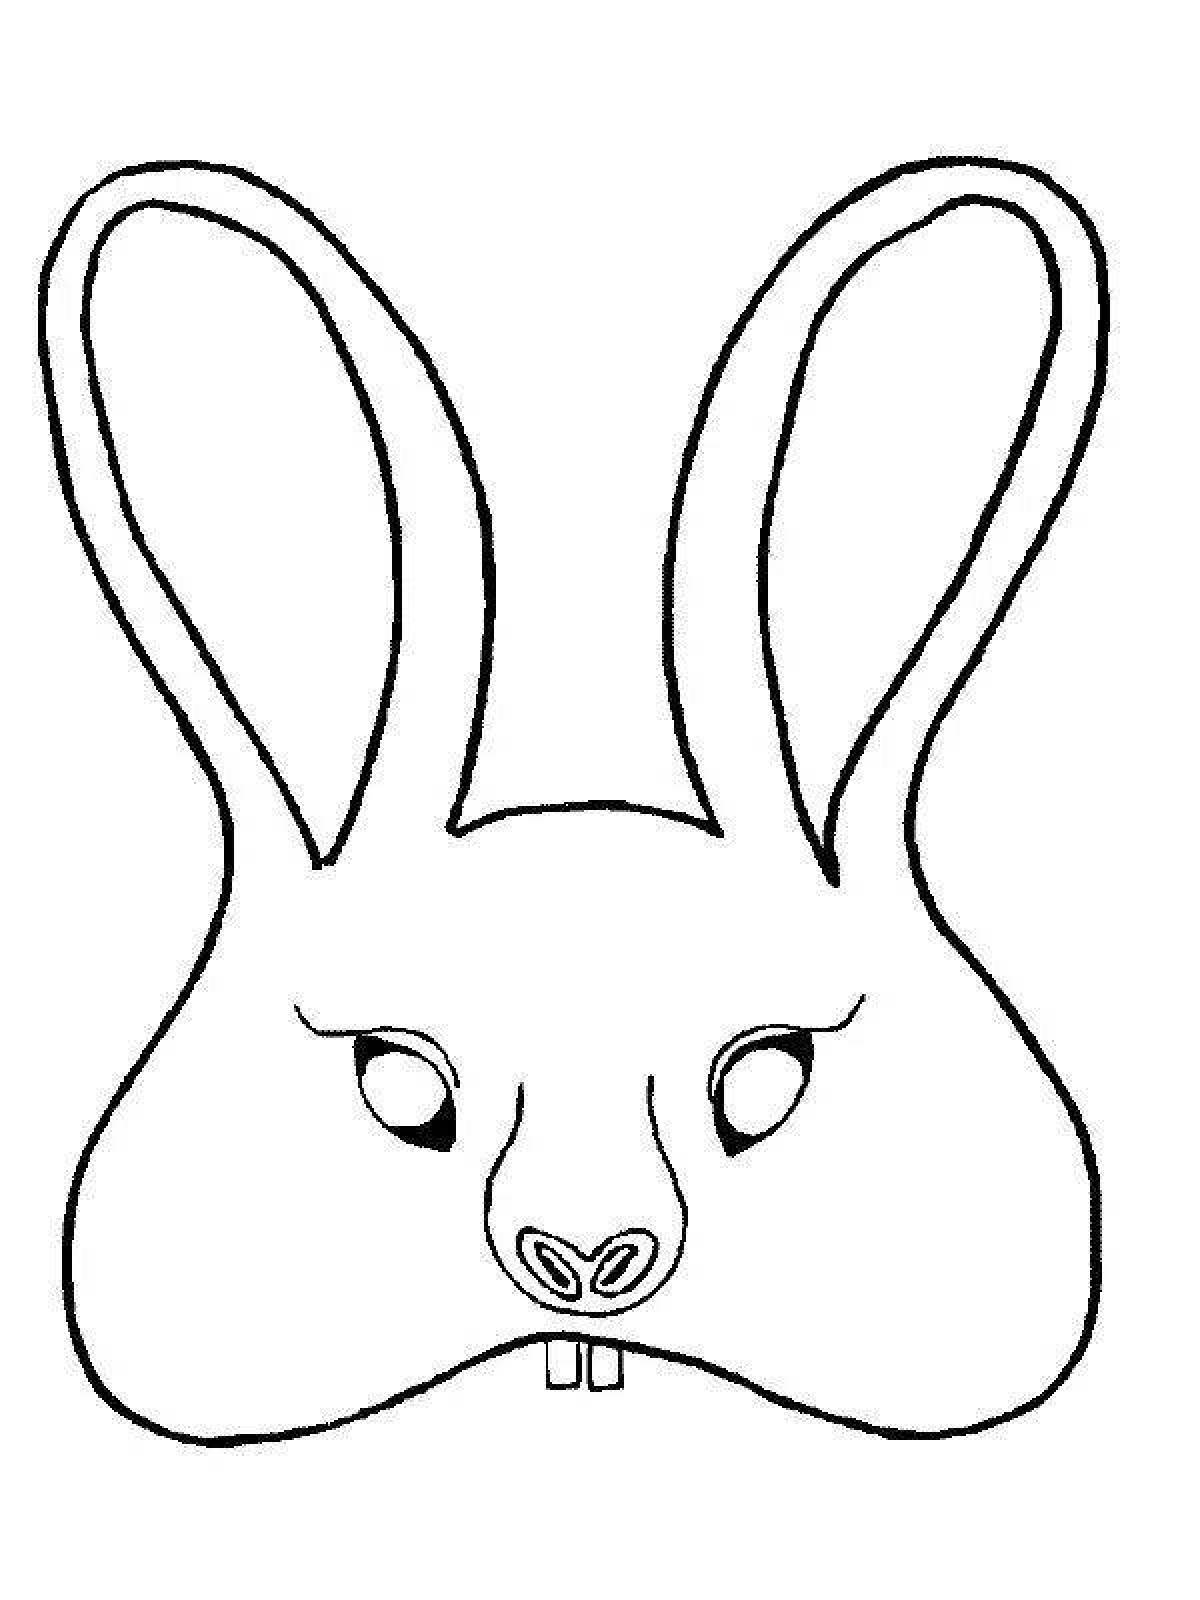 Humorous hare mask coloring book